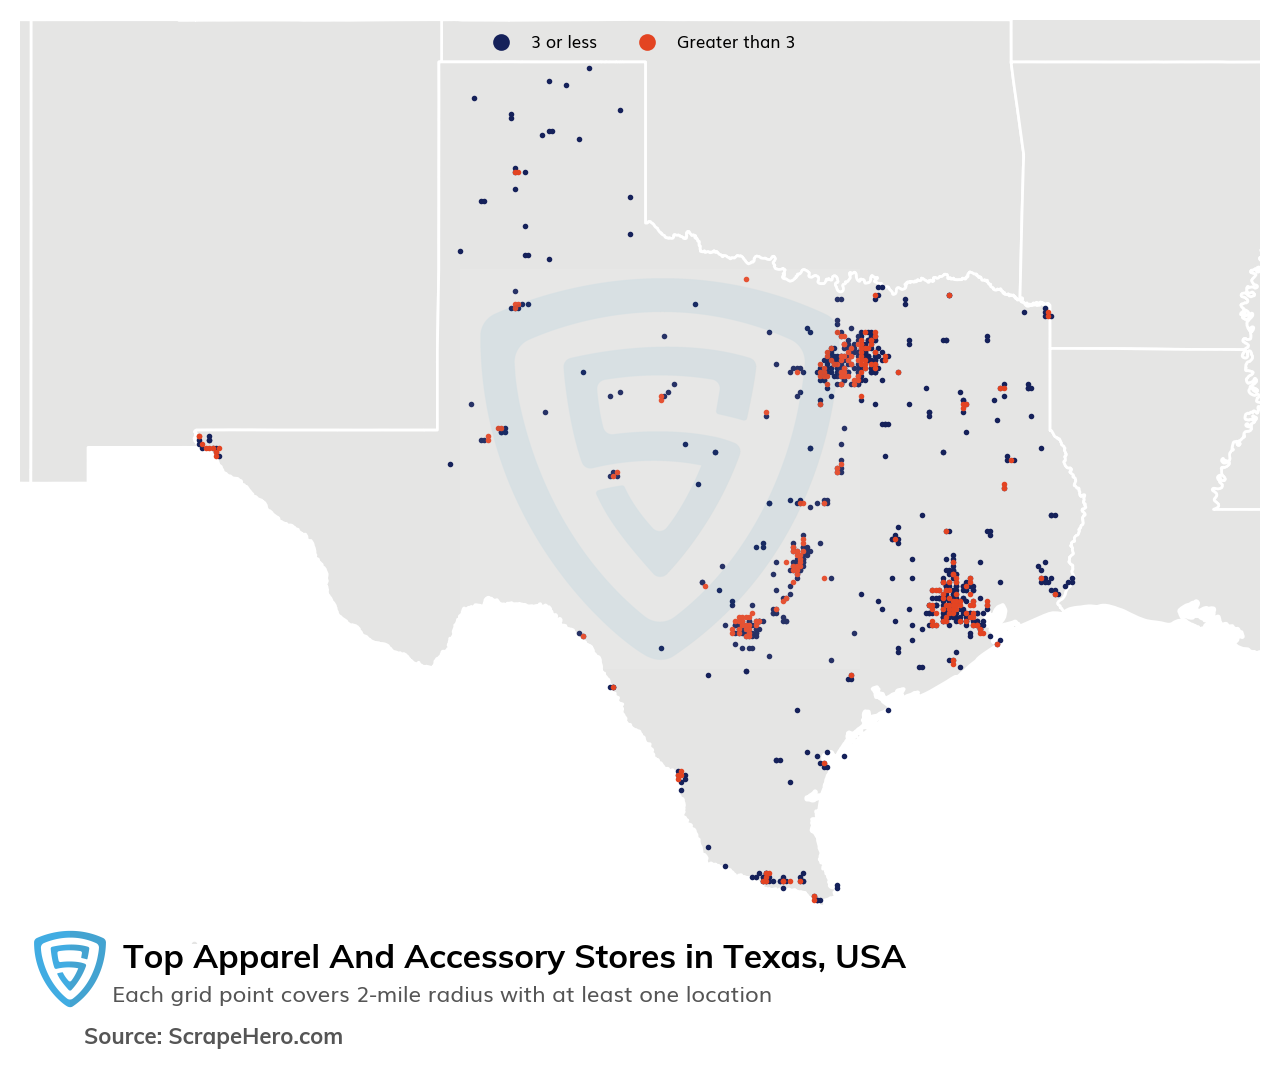 Map of 10 Largest apparel & accessory stores in Texas in 2022 Based on Locations